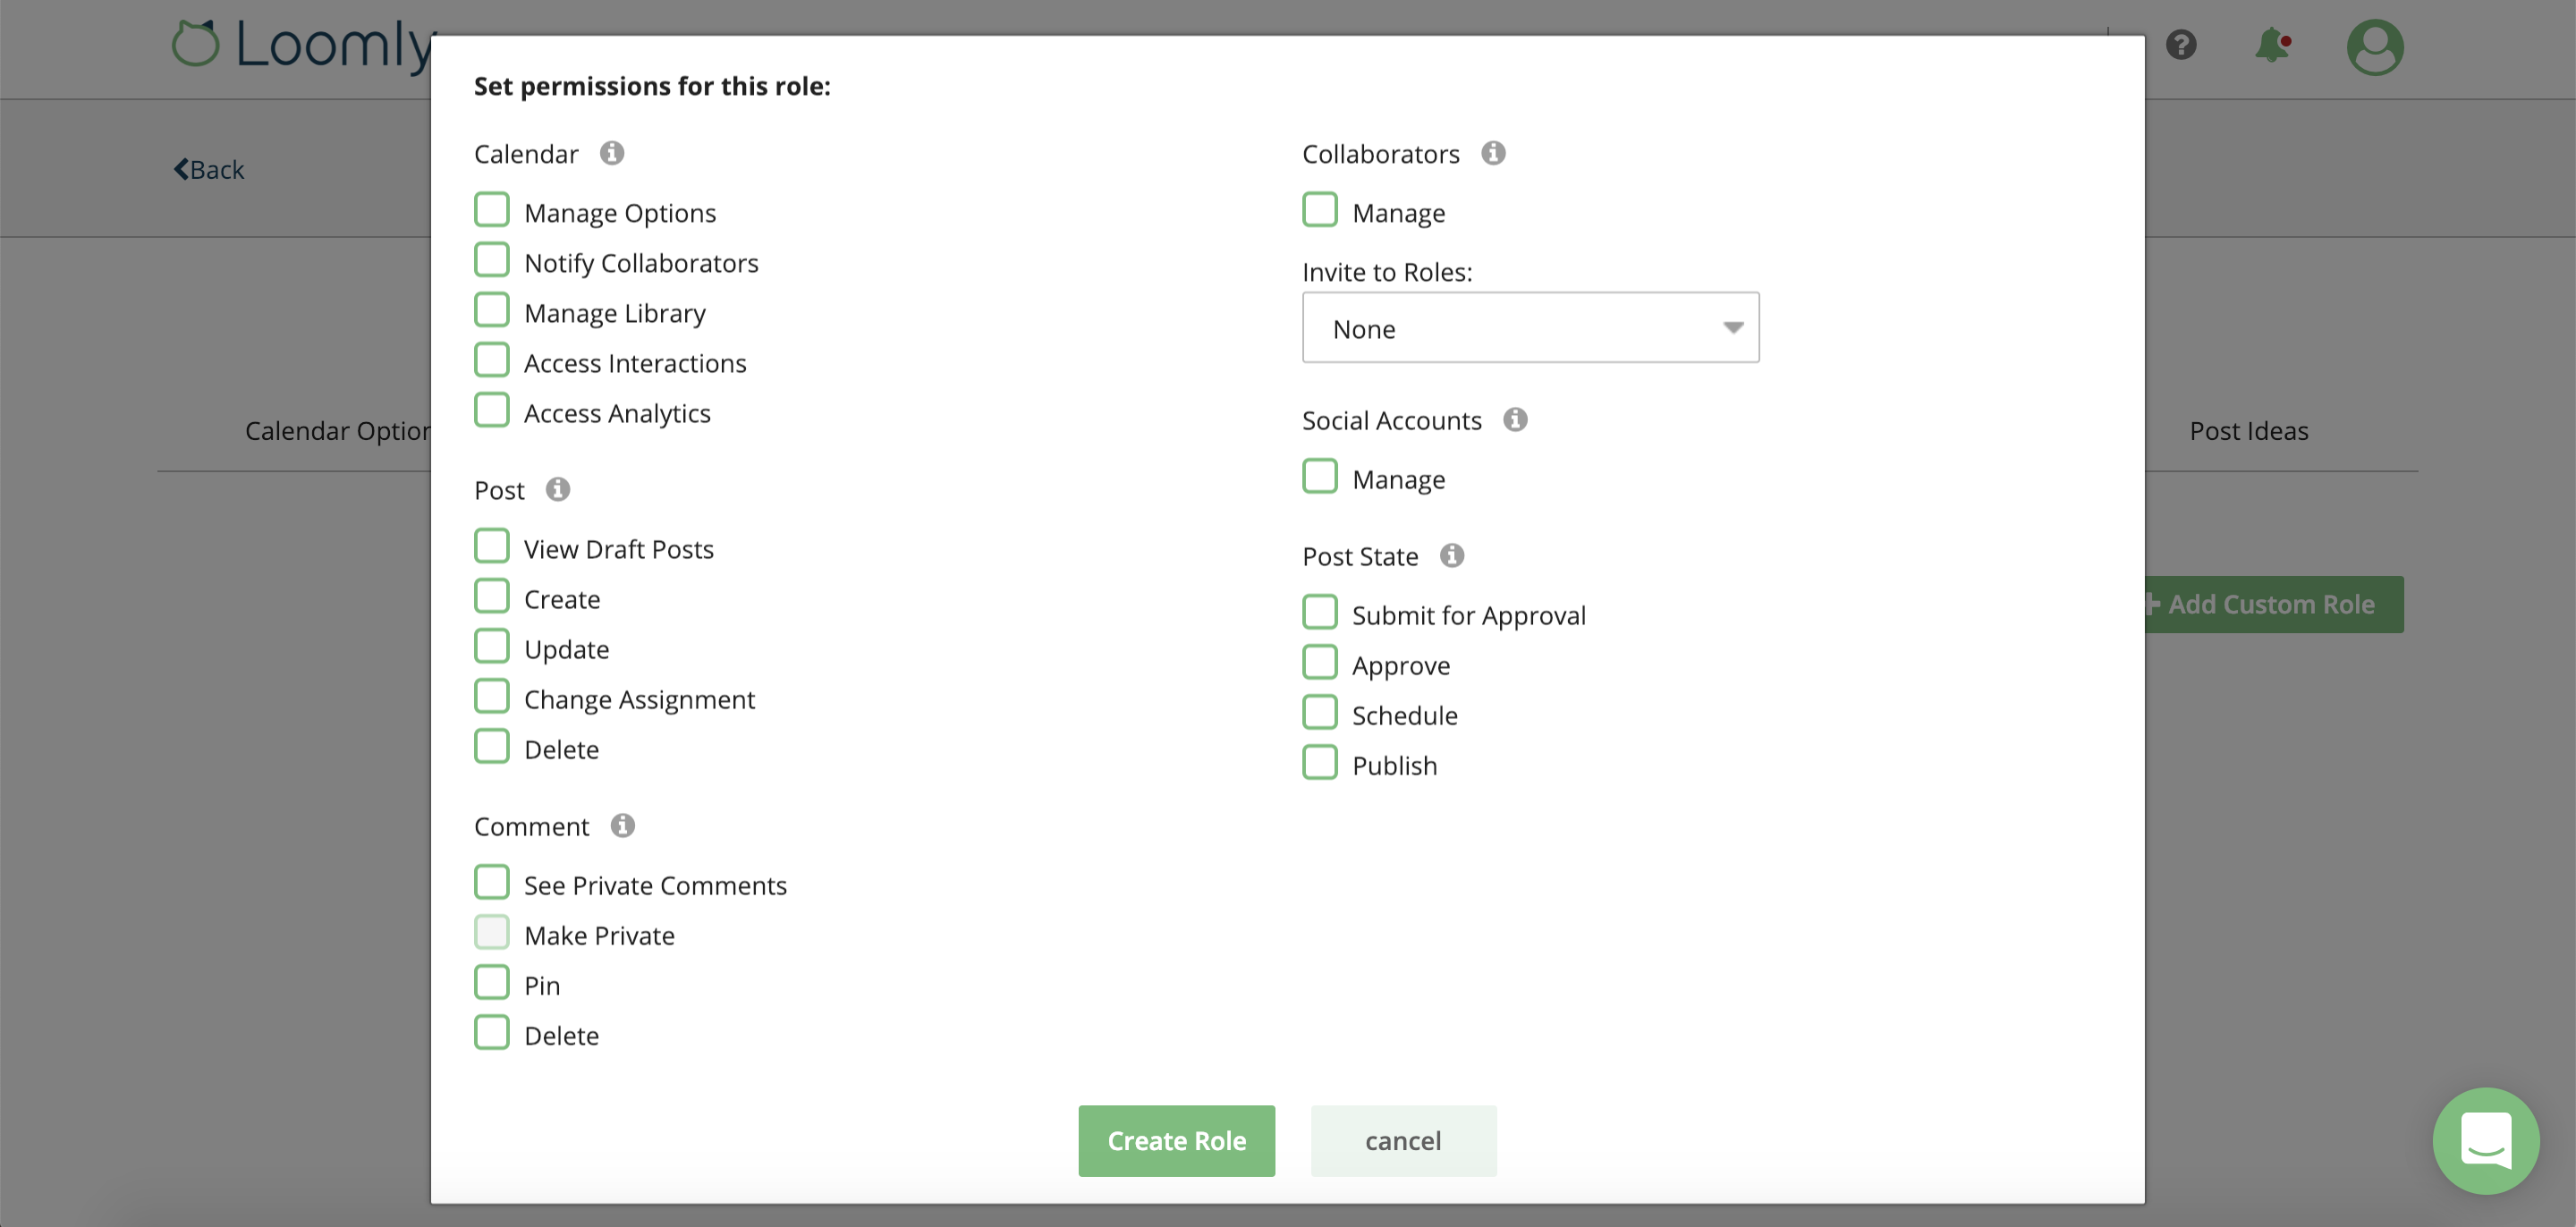 Loomly new advanced collaboration features custom roles